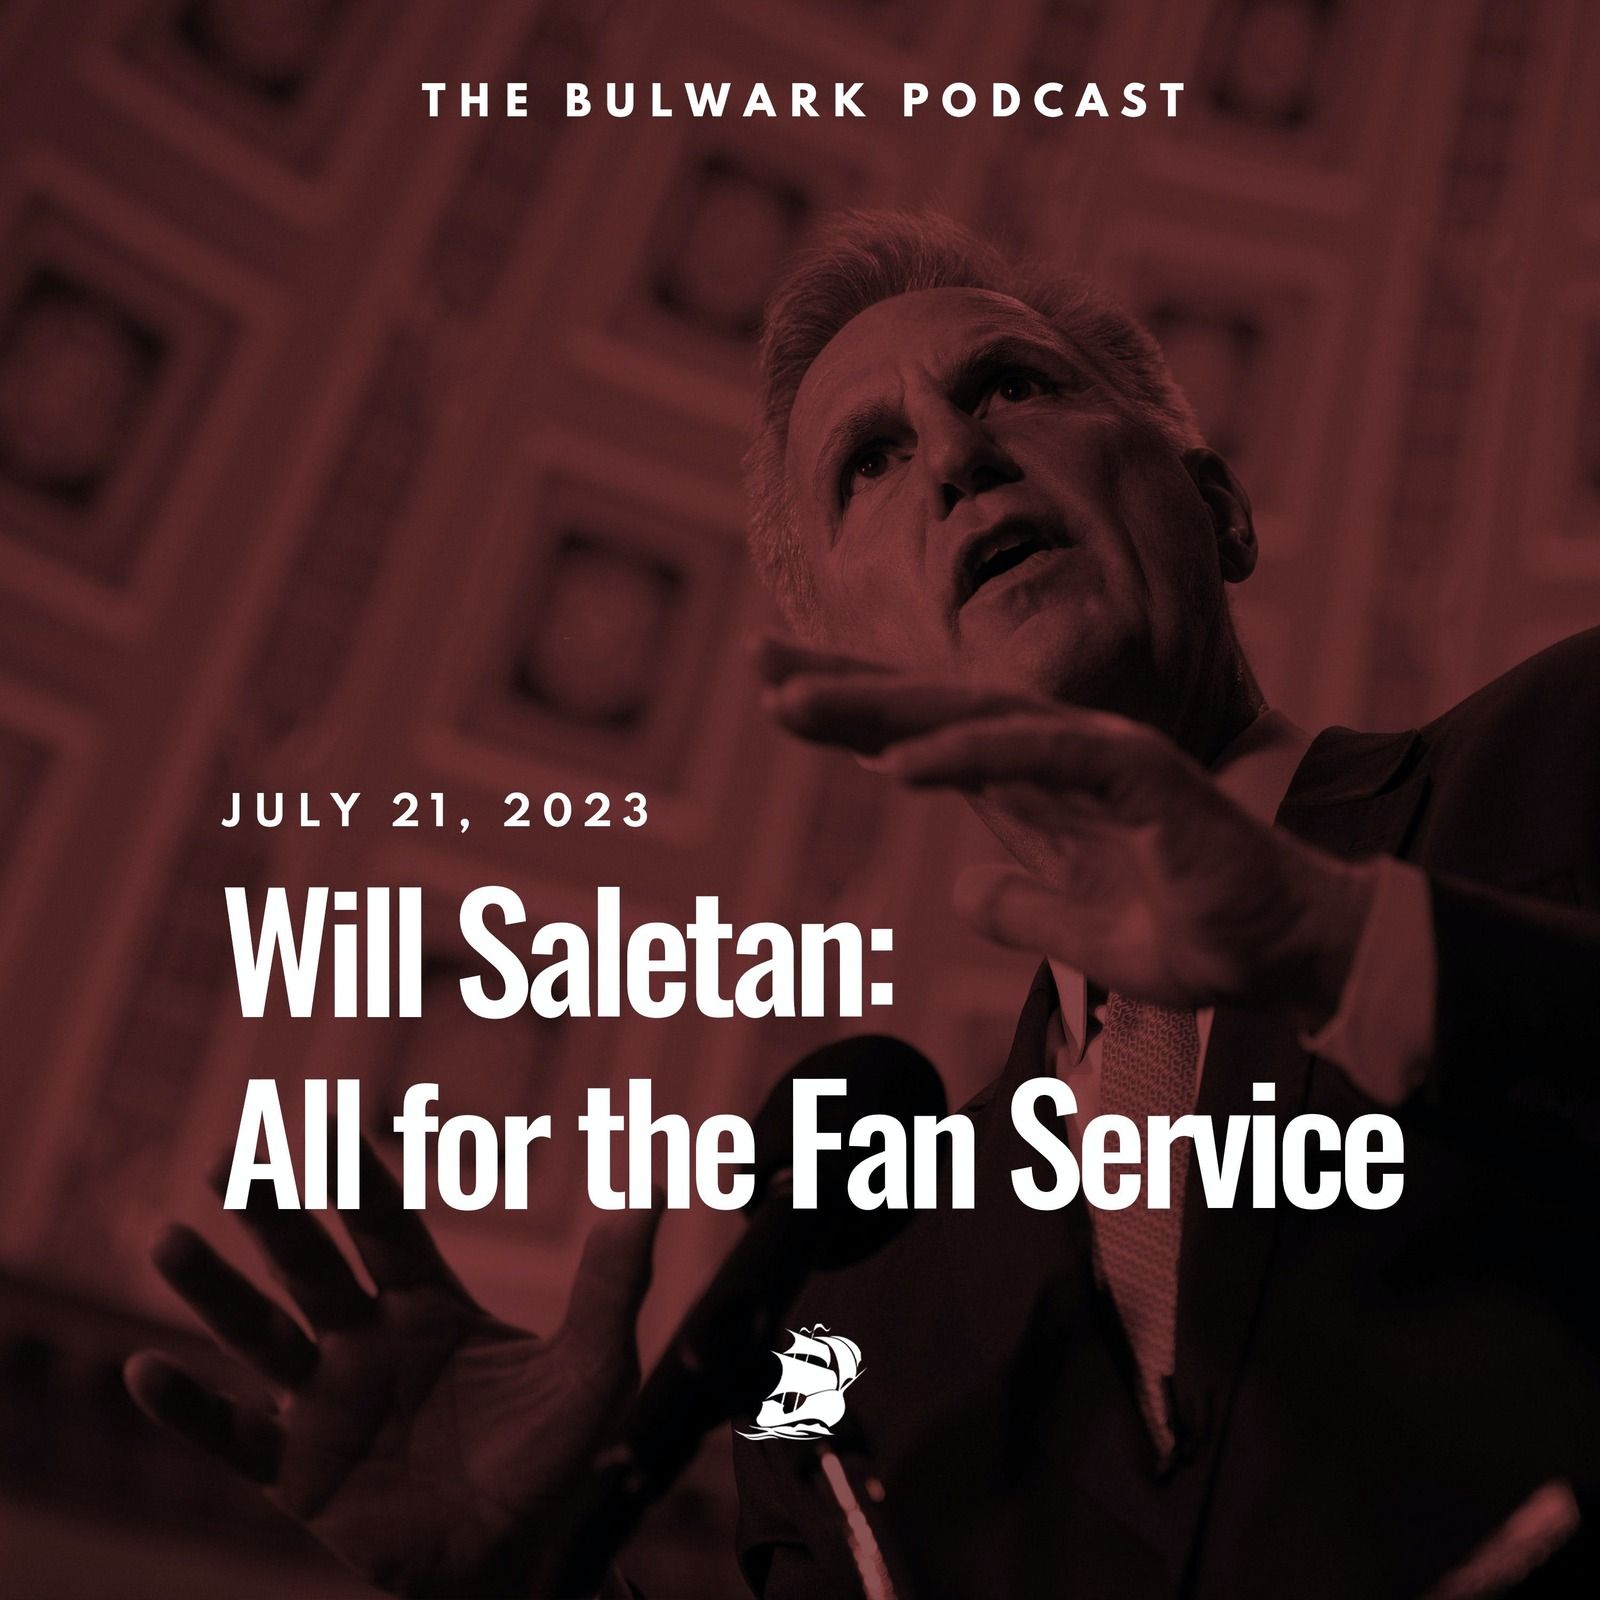 Will Saletan: All for the Fan Service by The Bulwark Podcast